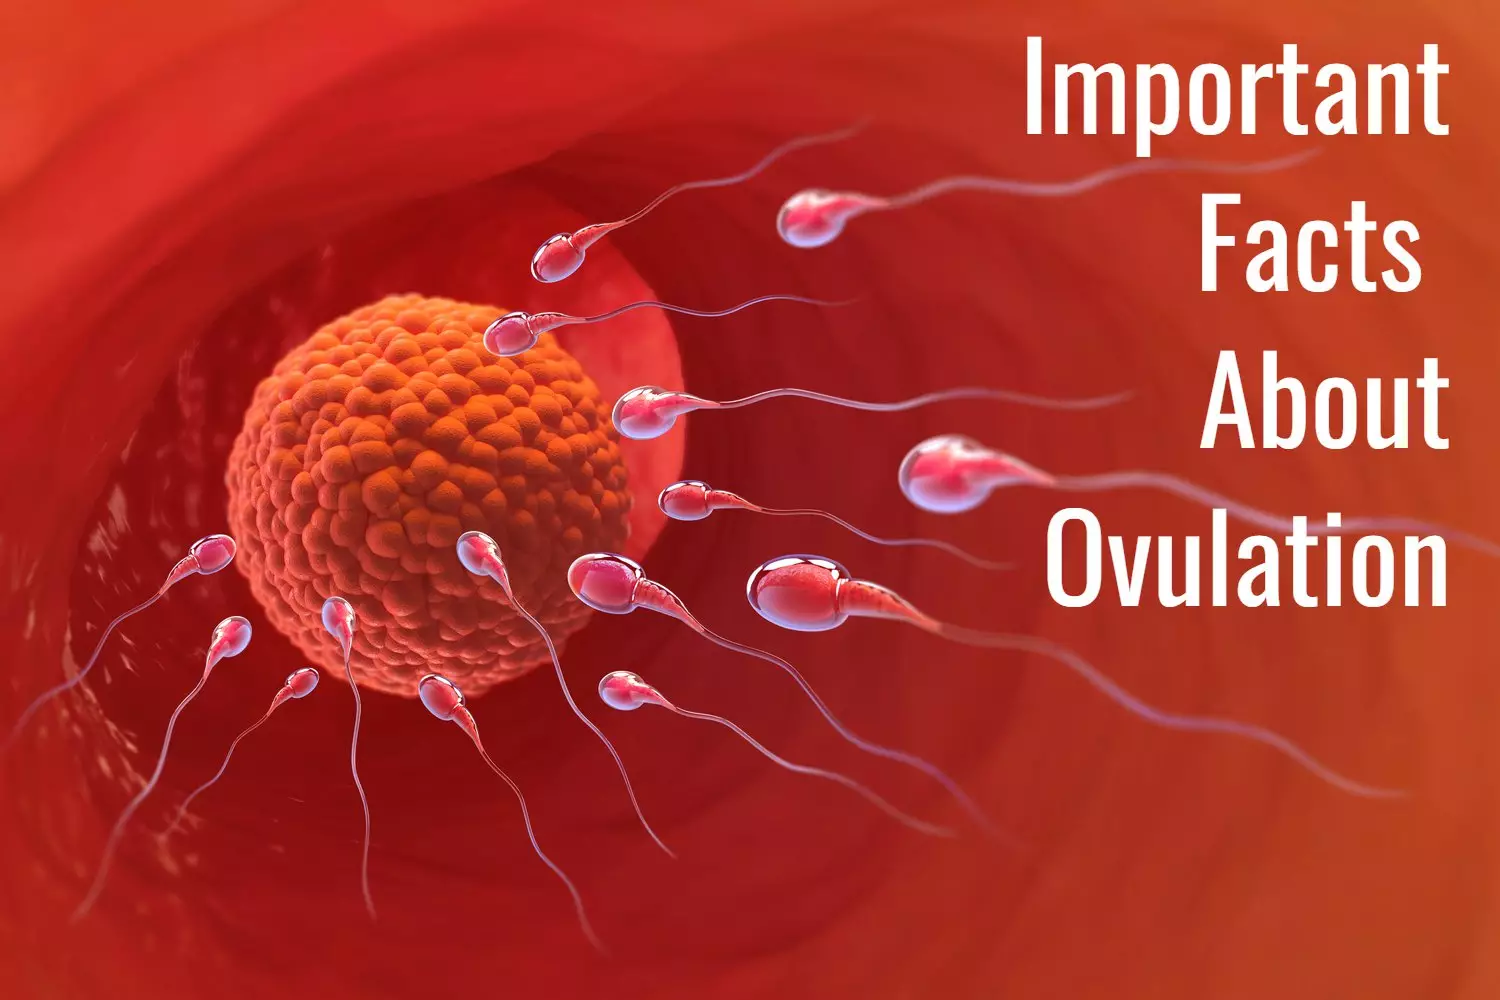 Important Facts About Ovulation